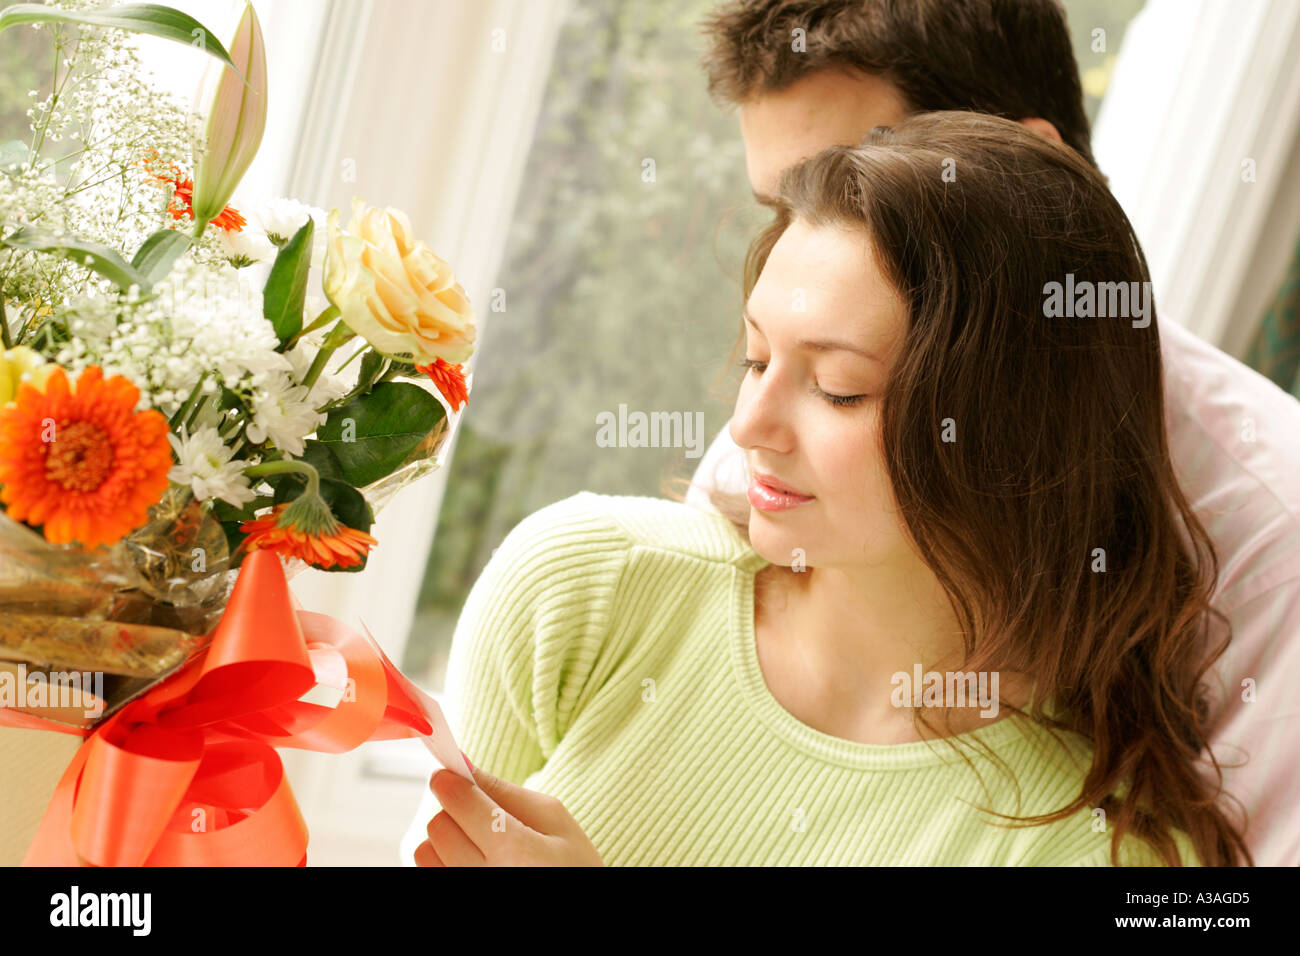 Young couple with flowers Stock Photo